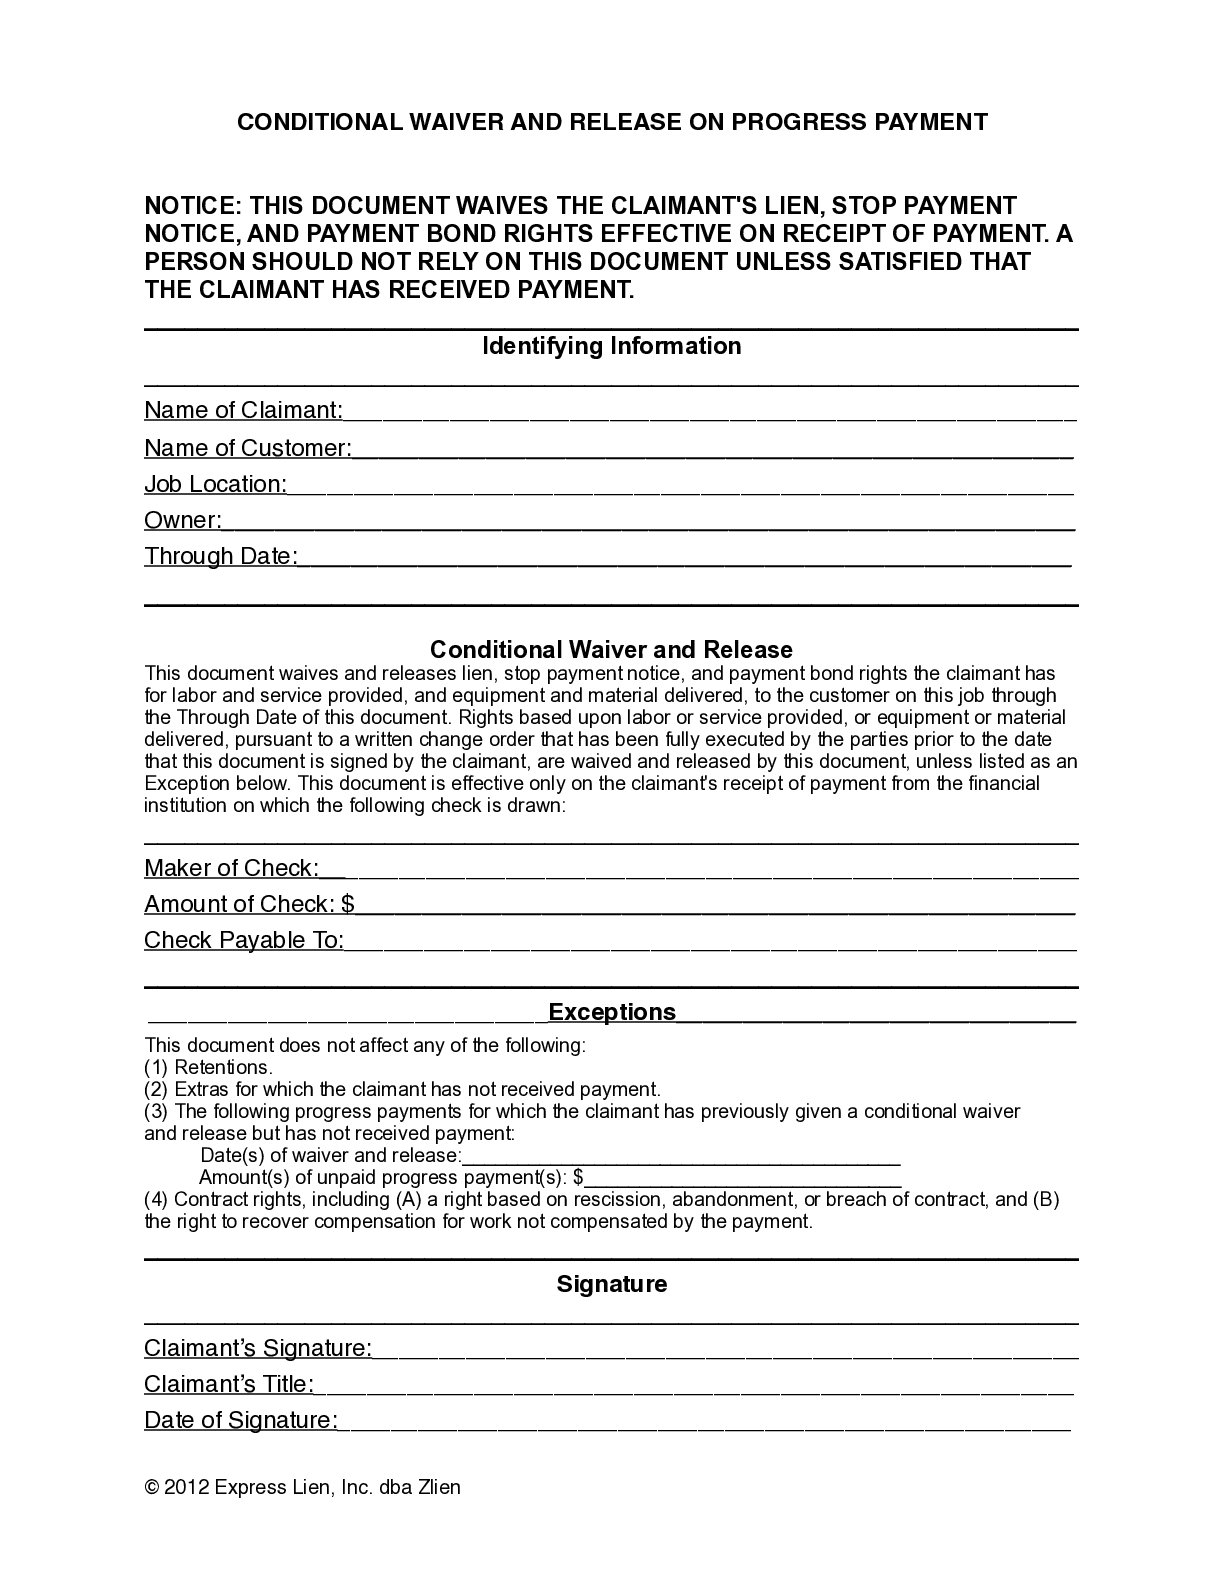 Wisconsin Partial Conditional Lien Waiver Form - free from